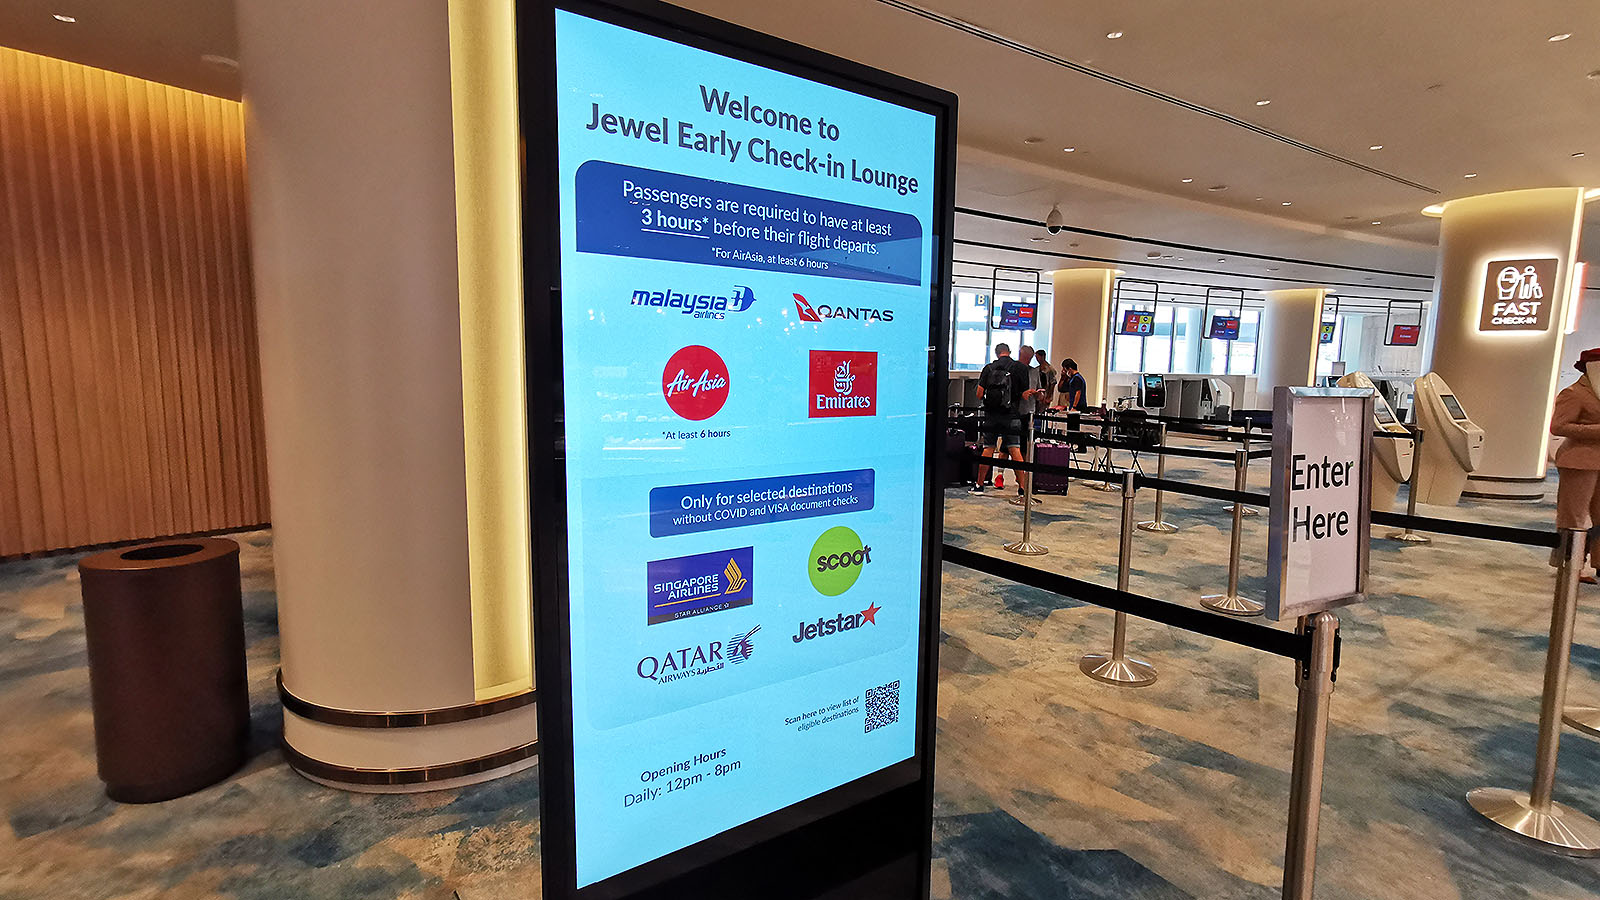 Check-in screen at Jewel